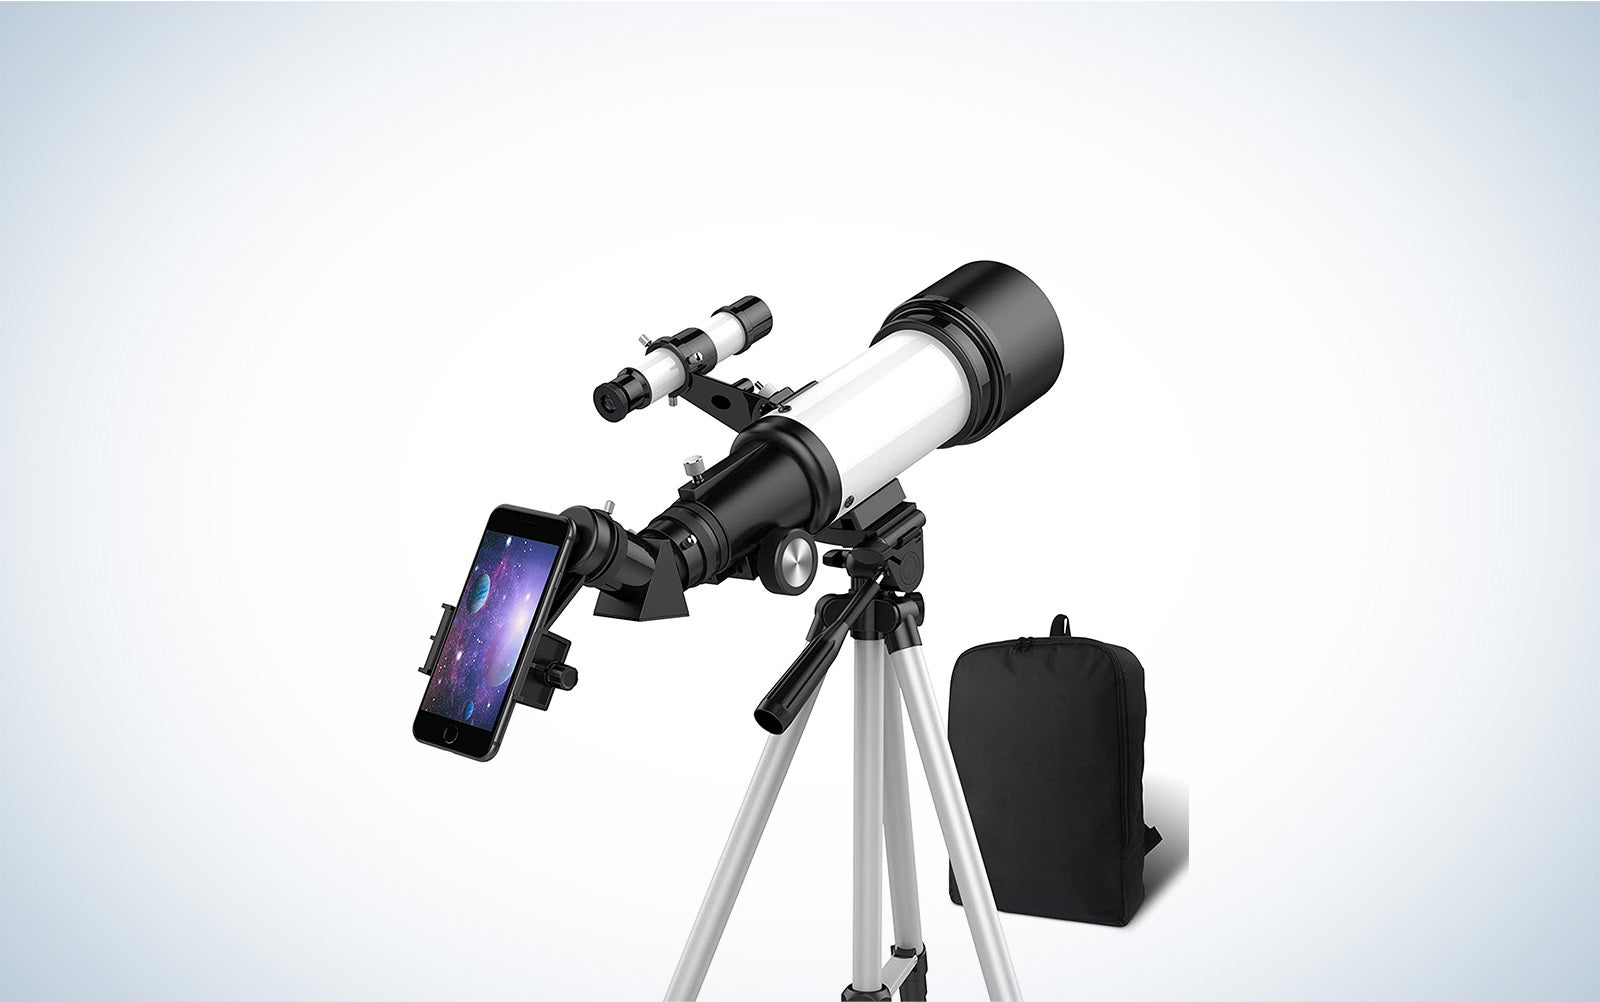 The OYS 70mm Telescope is the best travel telescope.